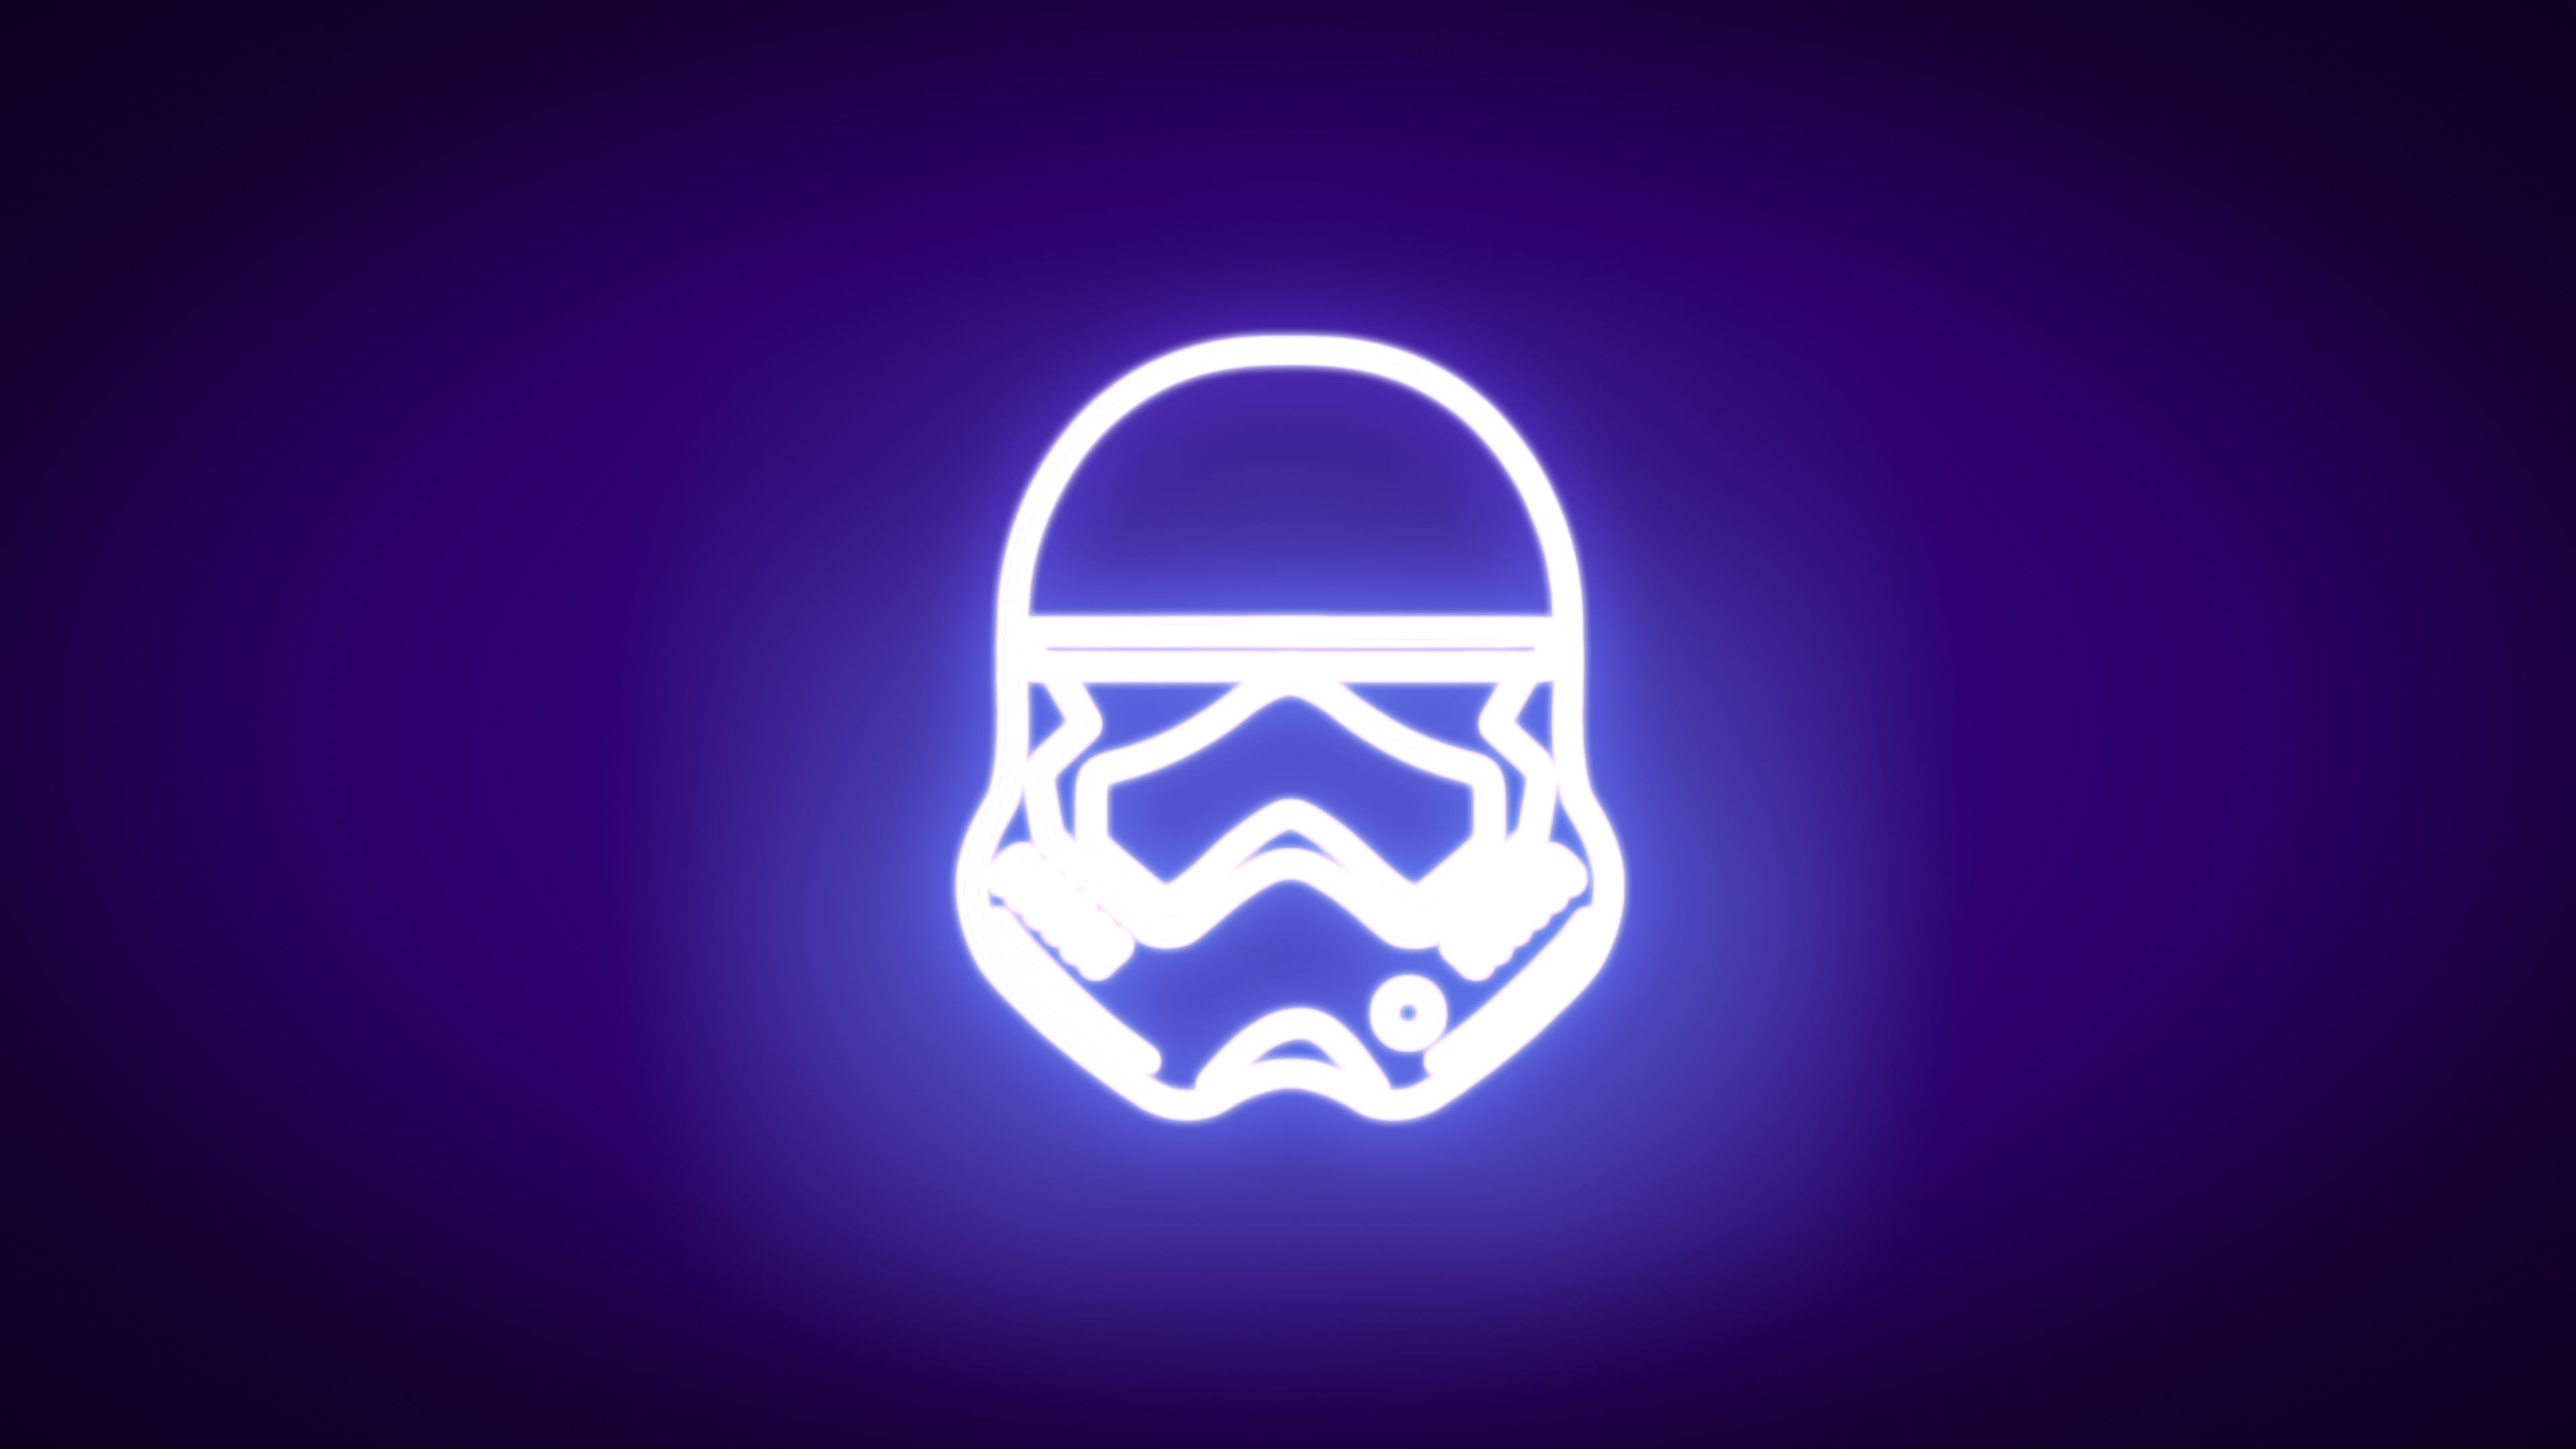 General 3840x2160 Star Wars neon simple background minimalism stormtrooper Imperial Forces Imperial Stormtrooper helmet purple background dark background